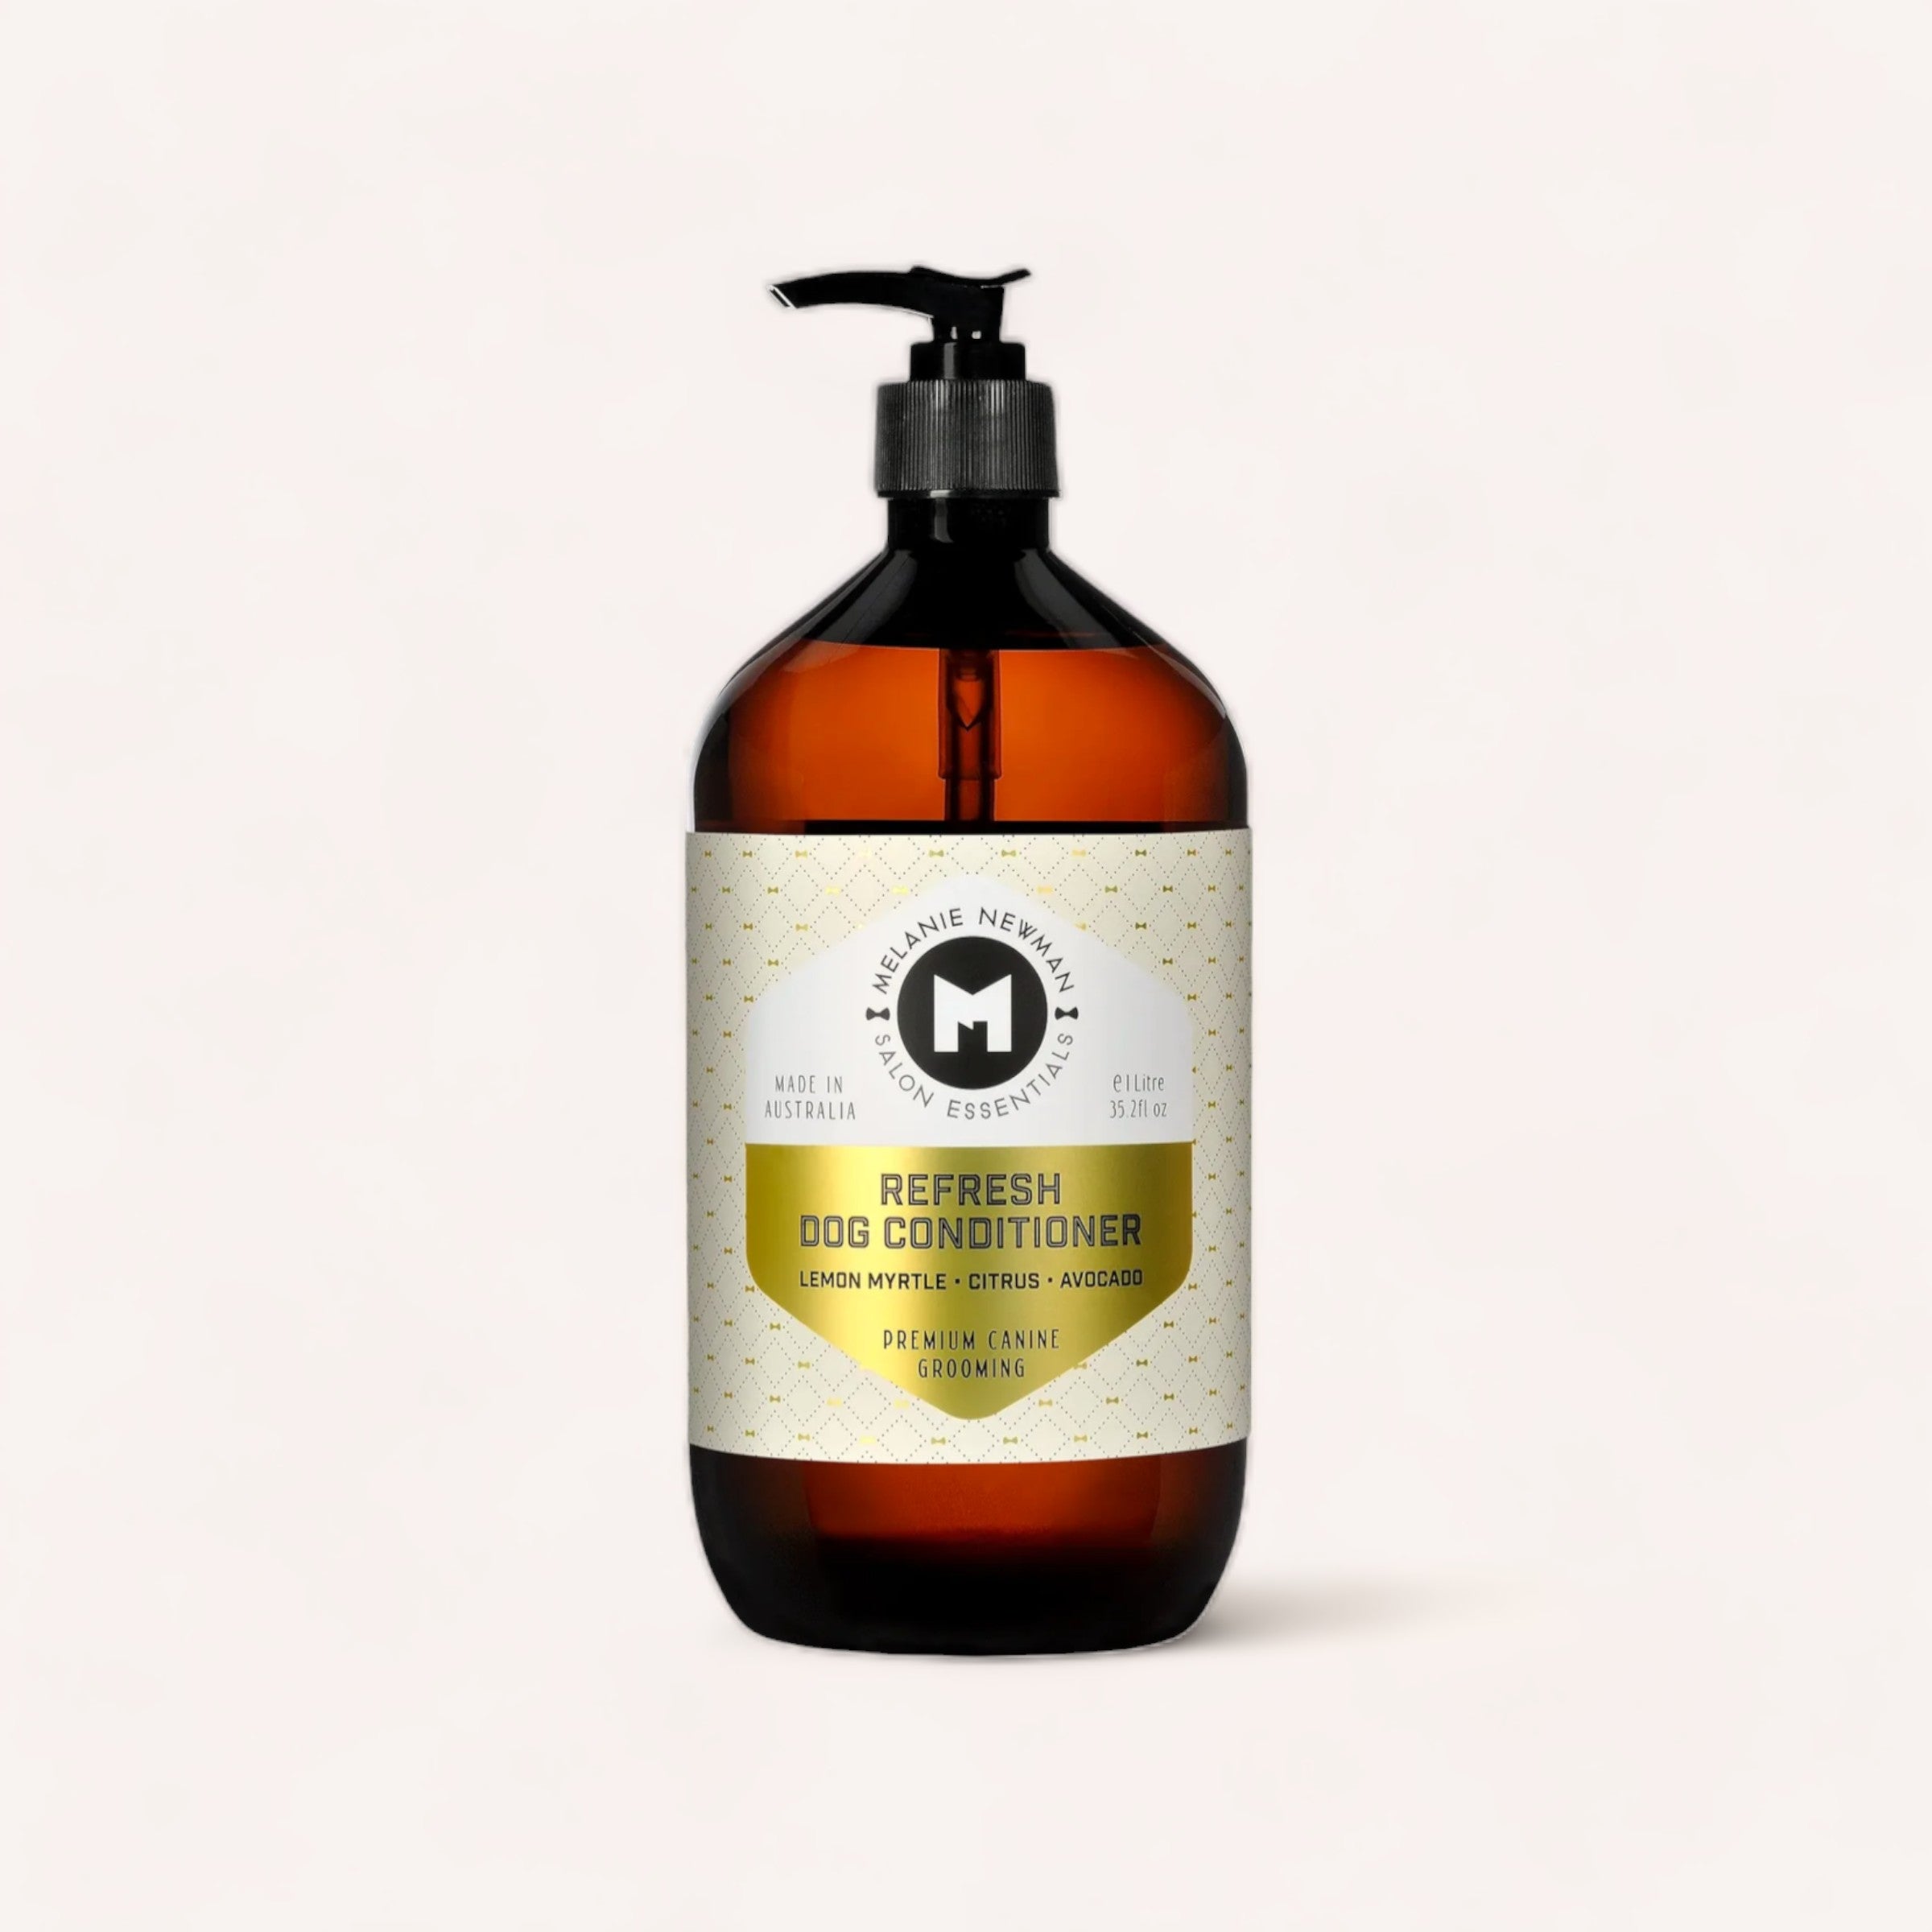 A pump bottle of dog conditioner with a minimalist design, labeled "Refresh Dog Conditioner - Australian lemon myrtle, citrus & avocado oil," positioned against a clean, white background by Melanie Newman.